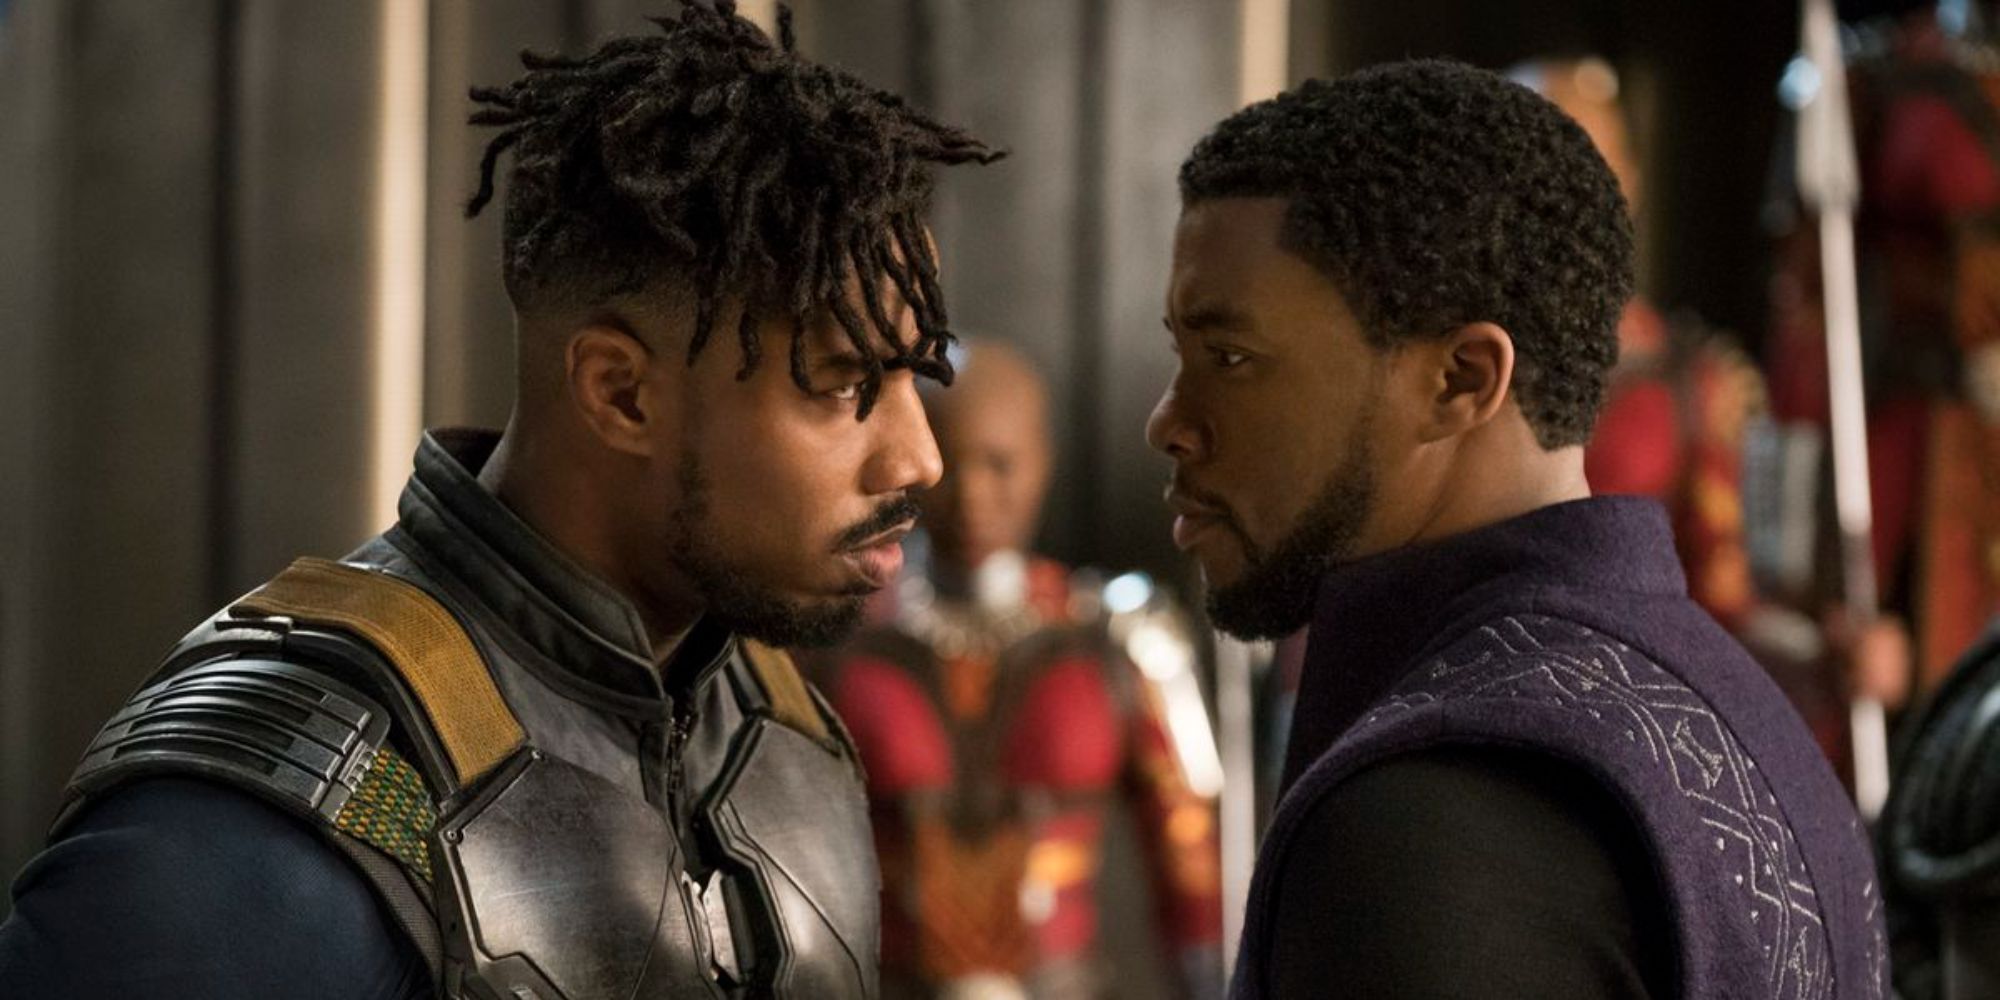 T'Challa and Killmonger size each other up